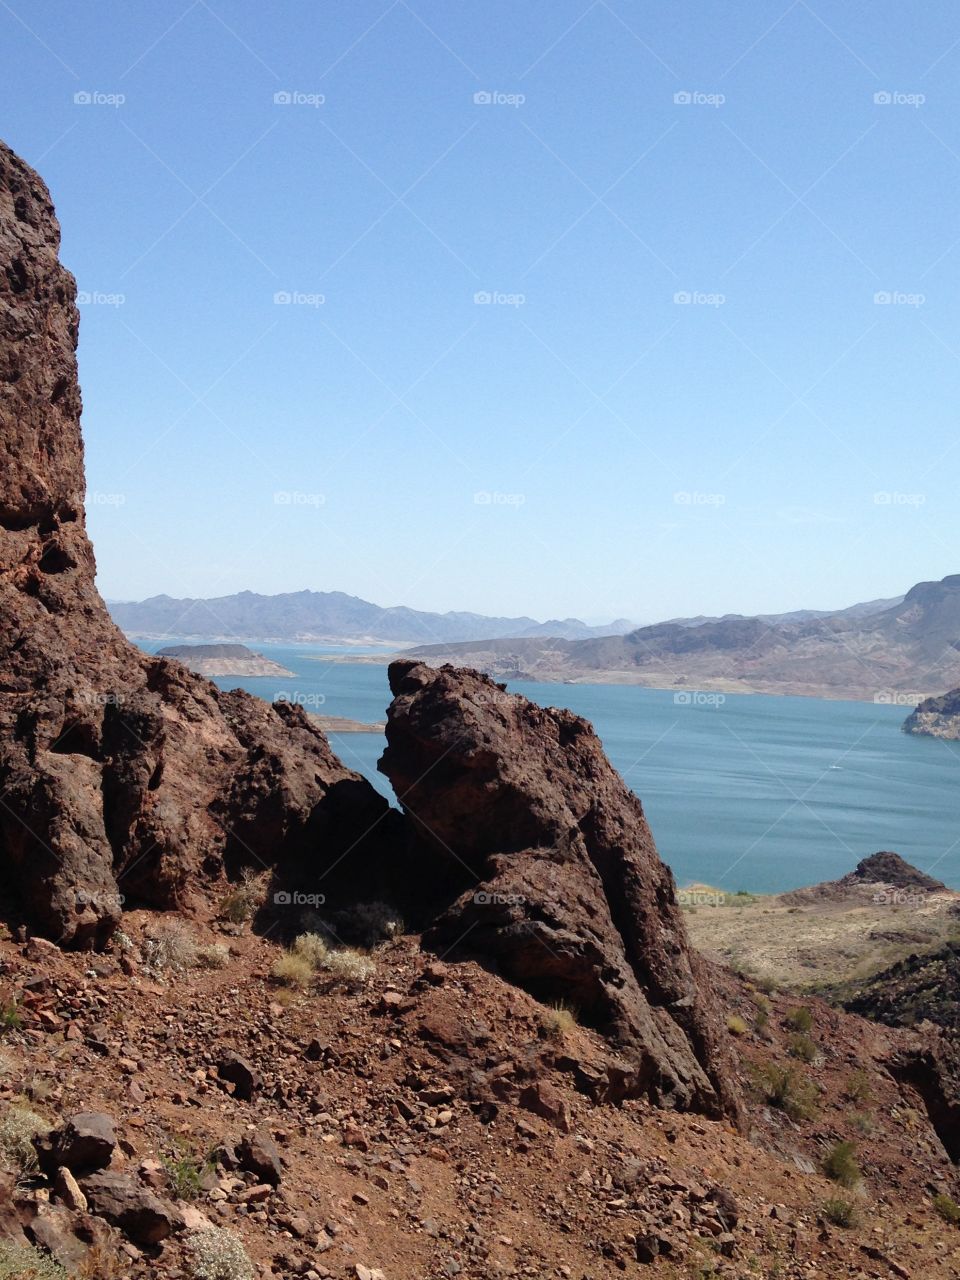 View of Lake Mead